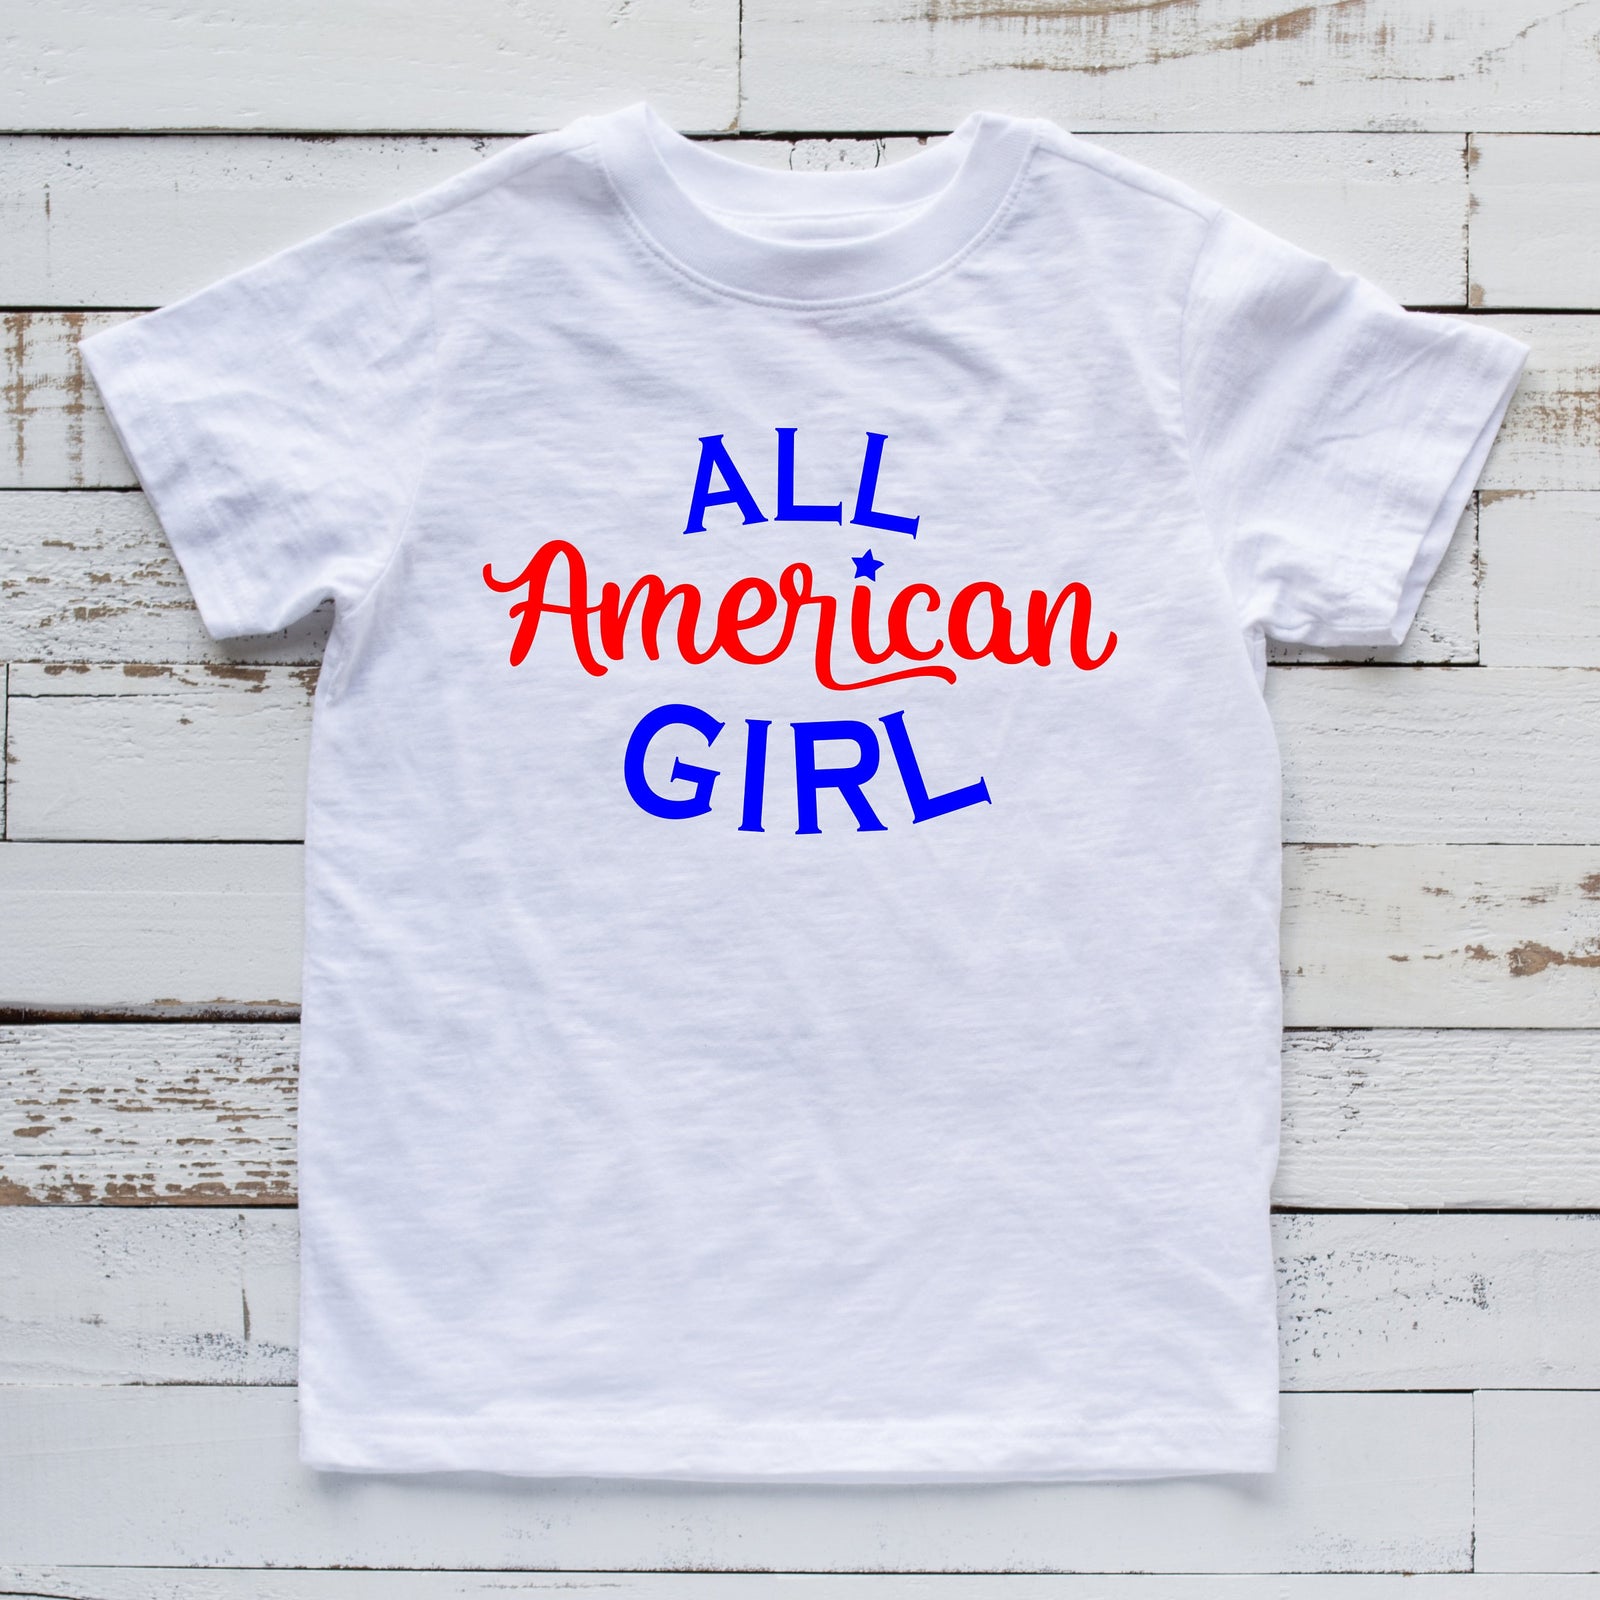 All American Girl - Youth Fourth Of July Shirt - Memorial Day - Red White and Blue